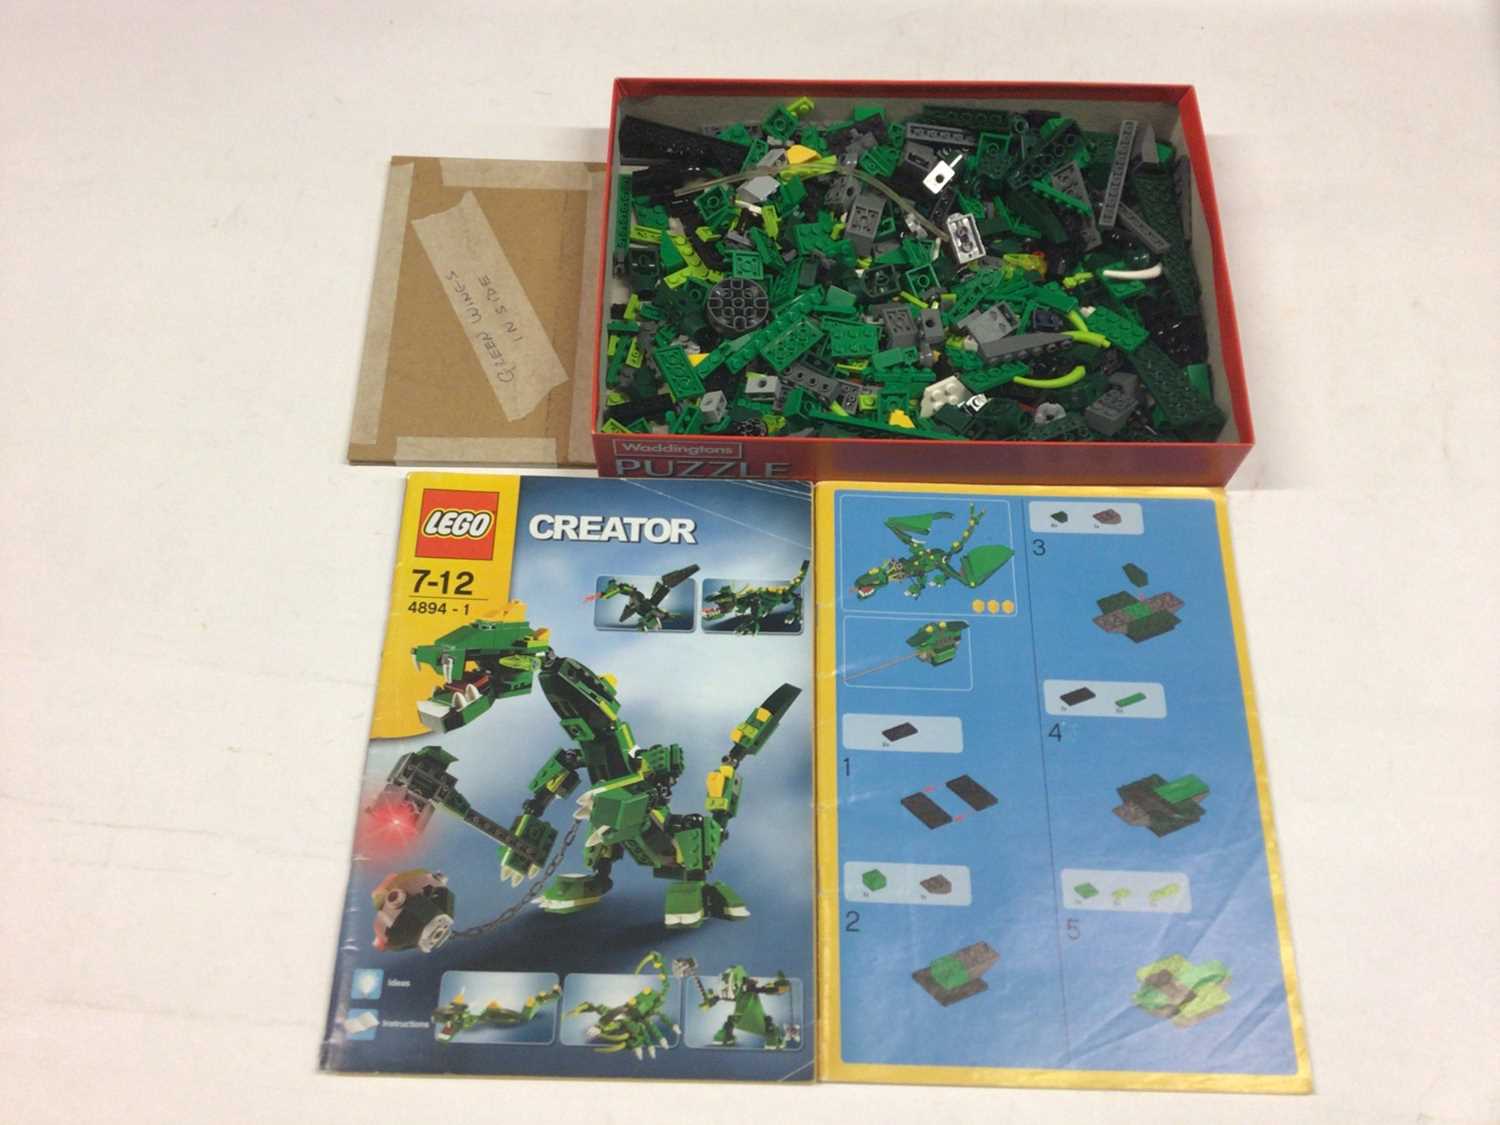 Lot 80 - Lego 4101 Wild Collection set, 2130 Birds (special limited edition) with instructions, 8456 Fibre Optic Multi with instructions available on line, no boxes